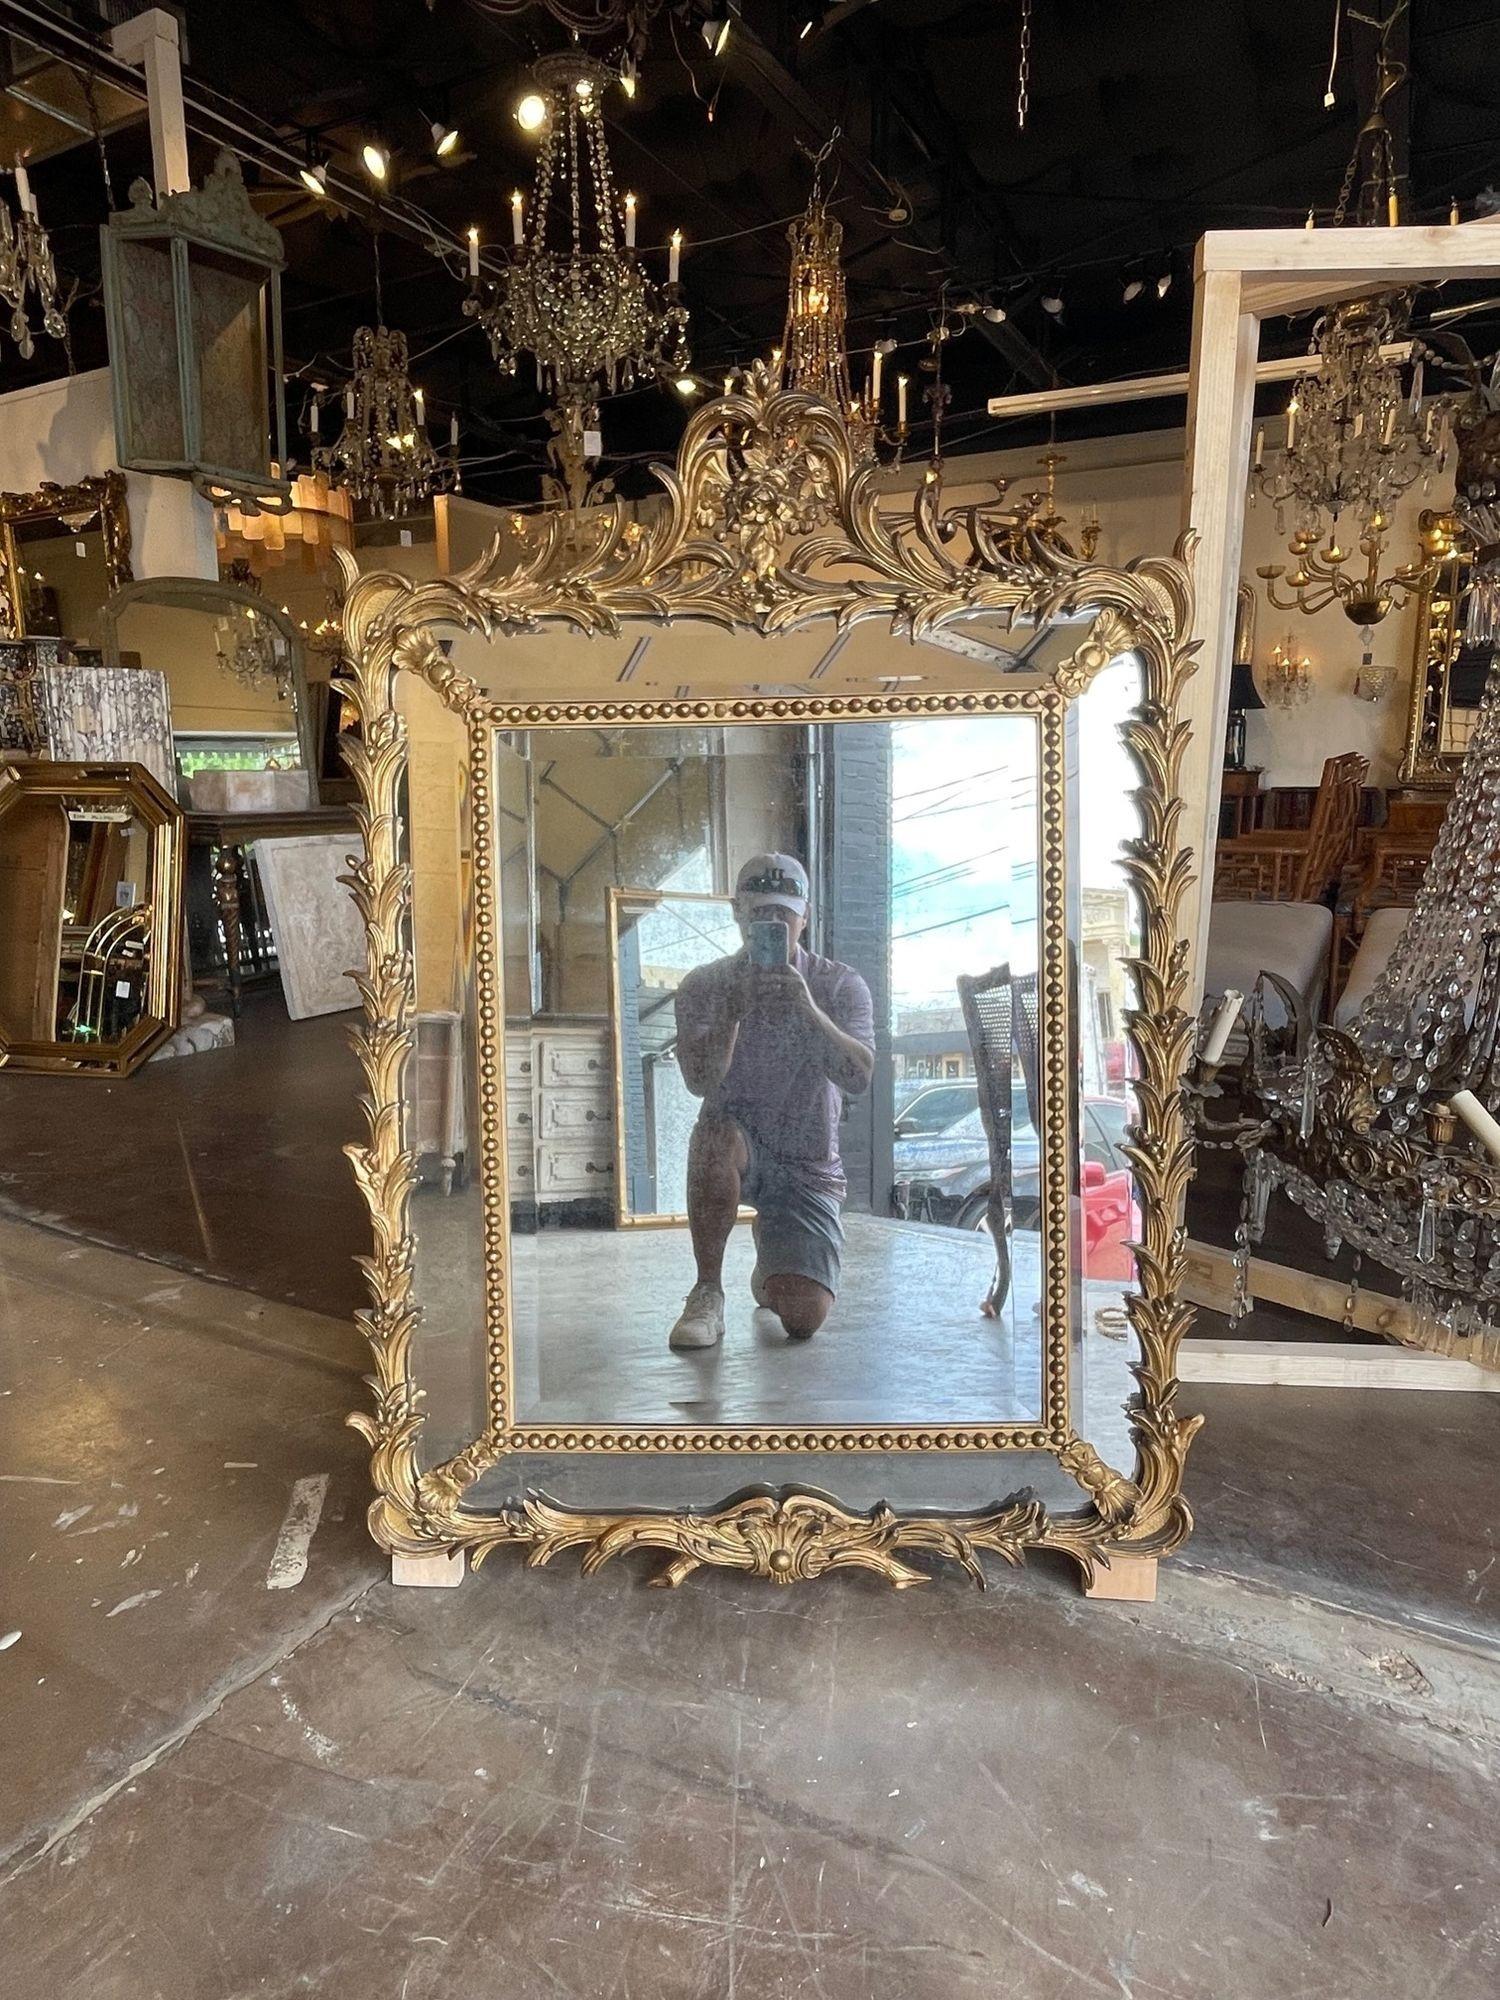 Exceptional 19th century French Louis XV style carved and gilt wood mirror. Beautiful carving including an elaborate crest with leaves at the top. Creates a very elegant look! Superb!